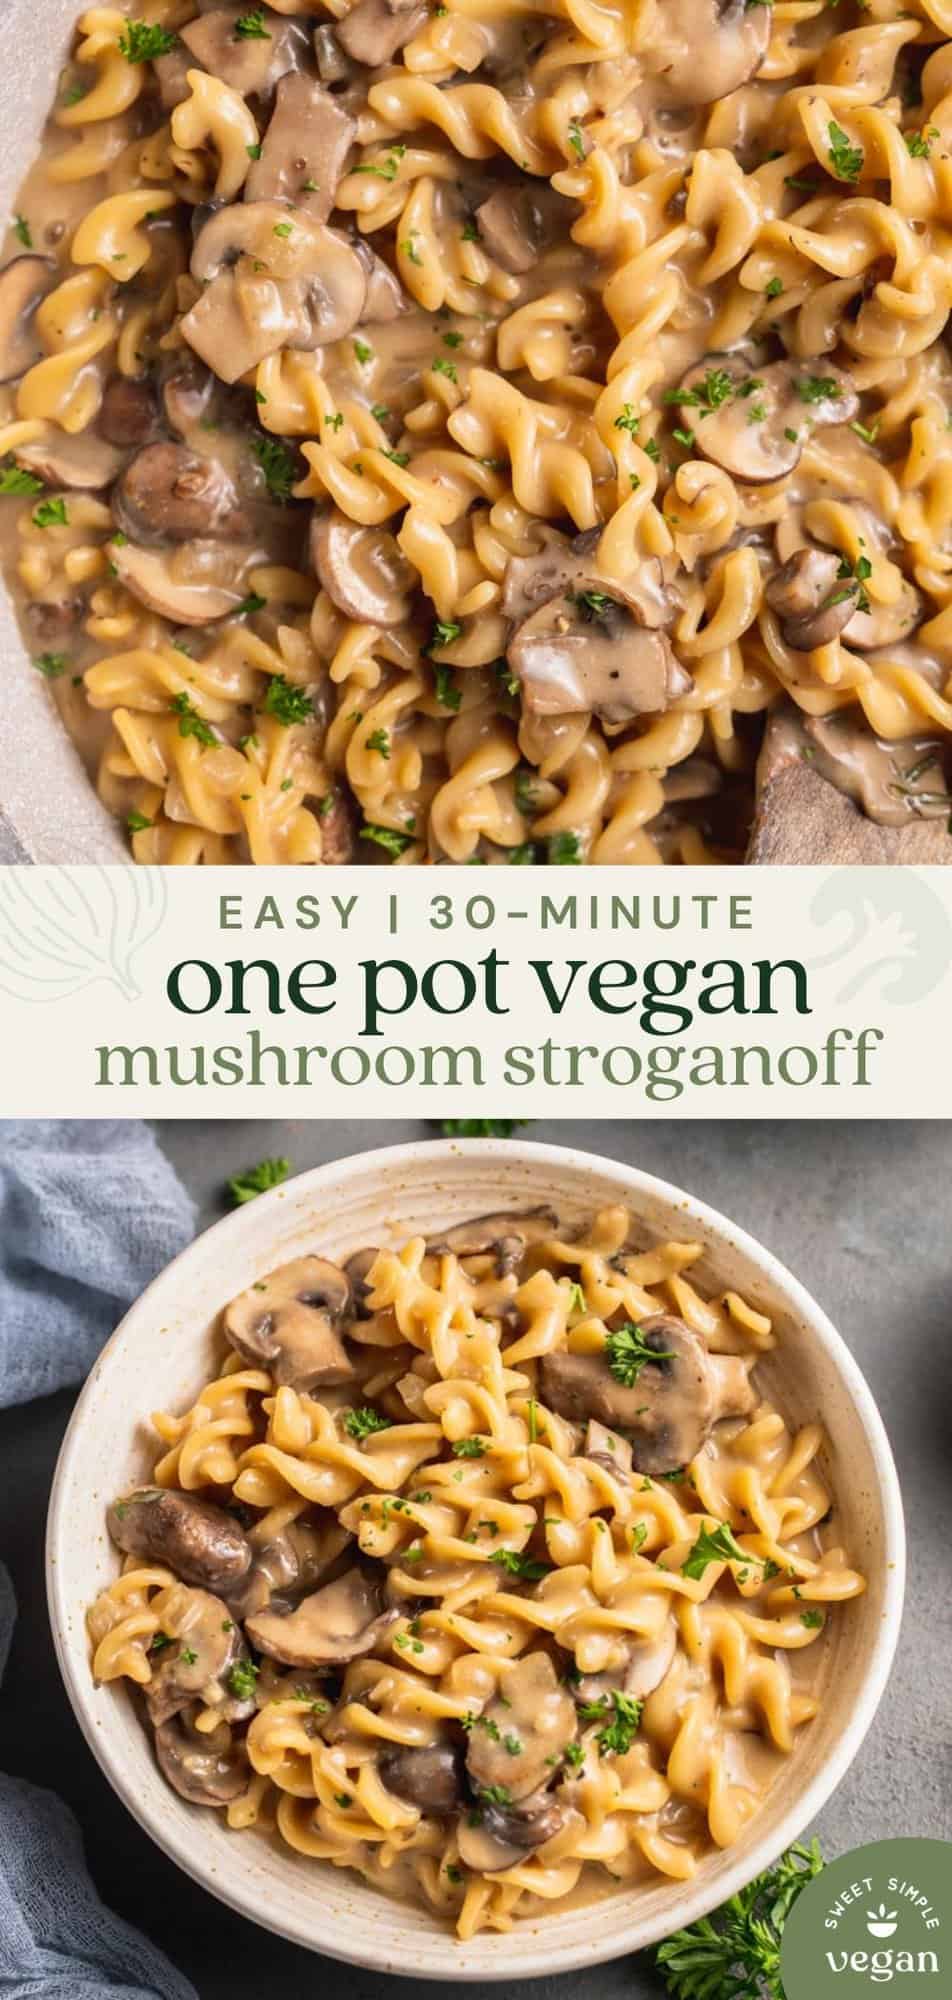 Pinterest Image with bowl of stroganoff and large pot on top